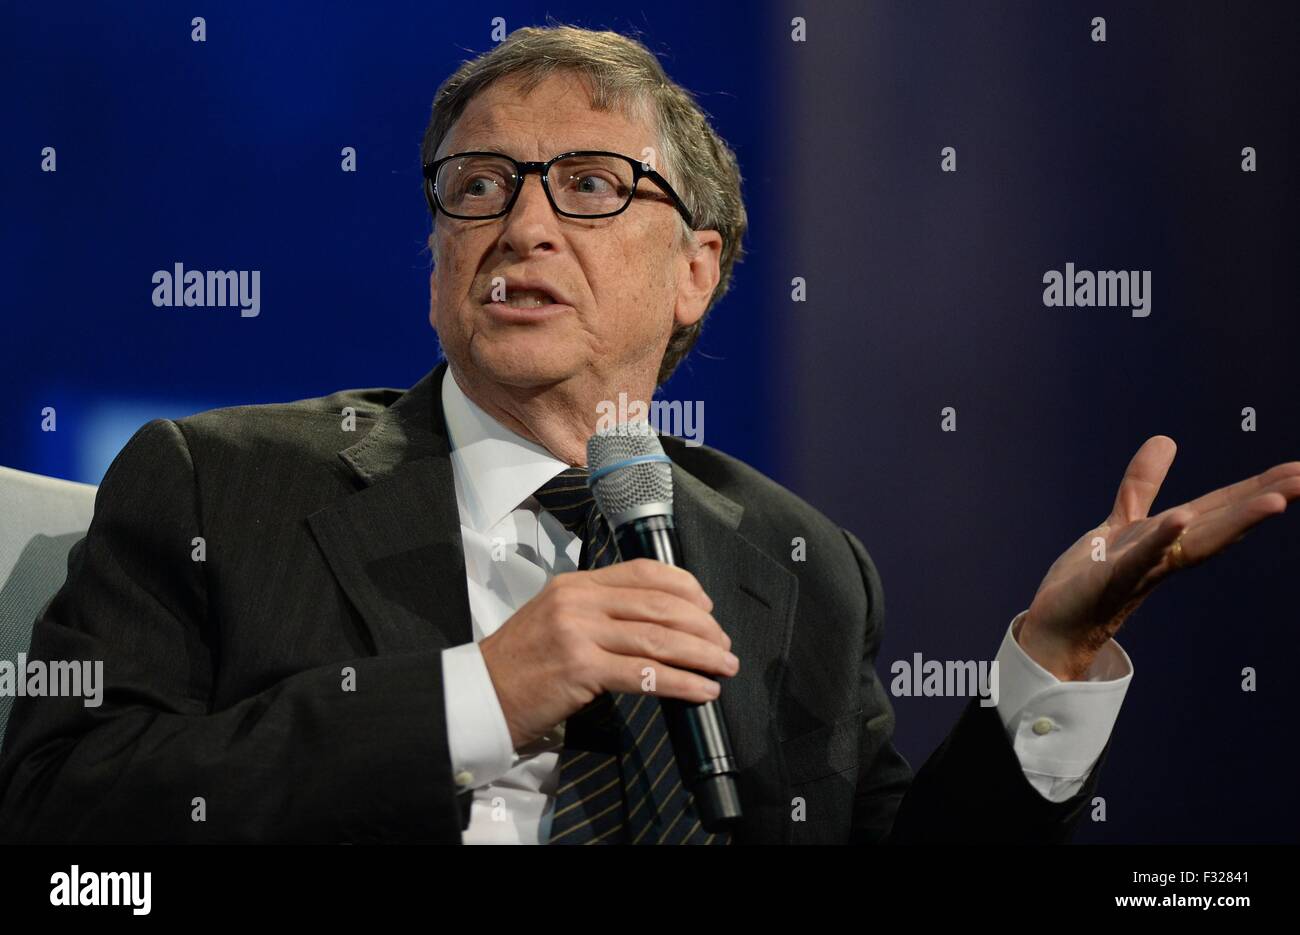 New York, NY, USA. 27th Sep, 2015. Bill Gates in attendance for 2015 Clinton Global Initiative - SUN, The Sheraton New York, New York, NY September 27, 2015. Credit:  Kristin Callahan/Everett Collection/Alamy Live News Stock Photo